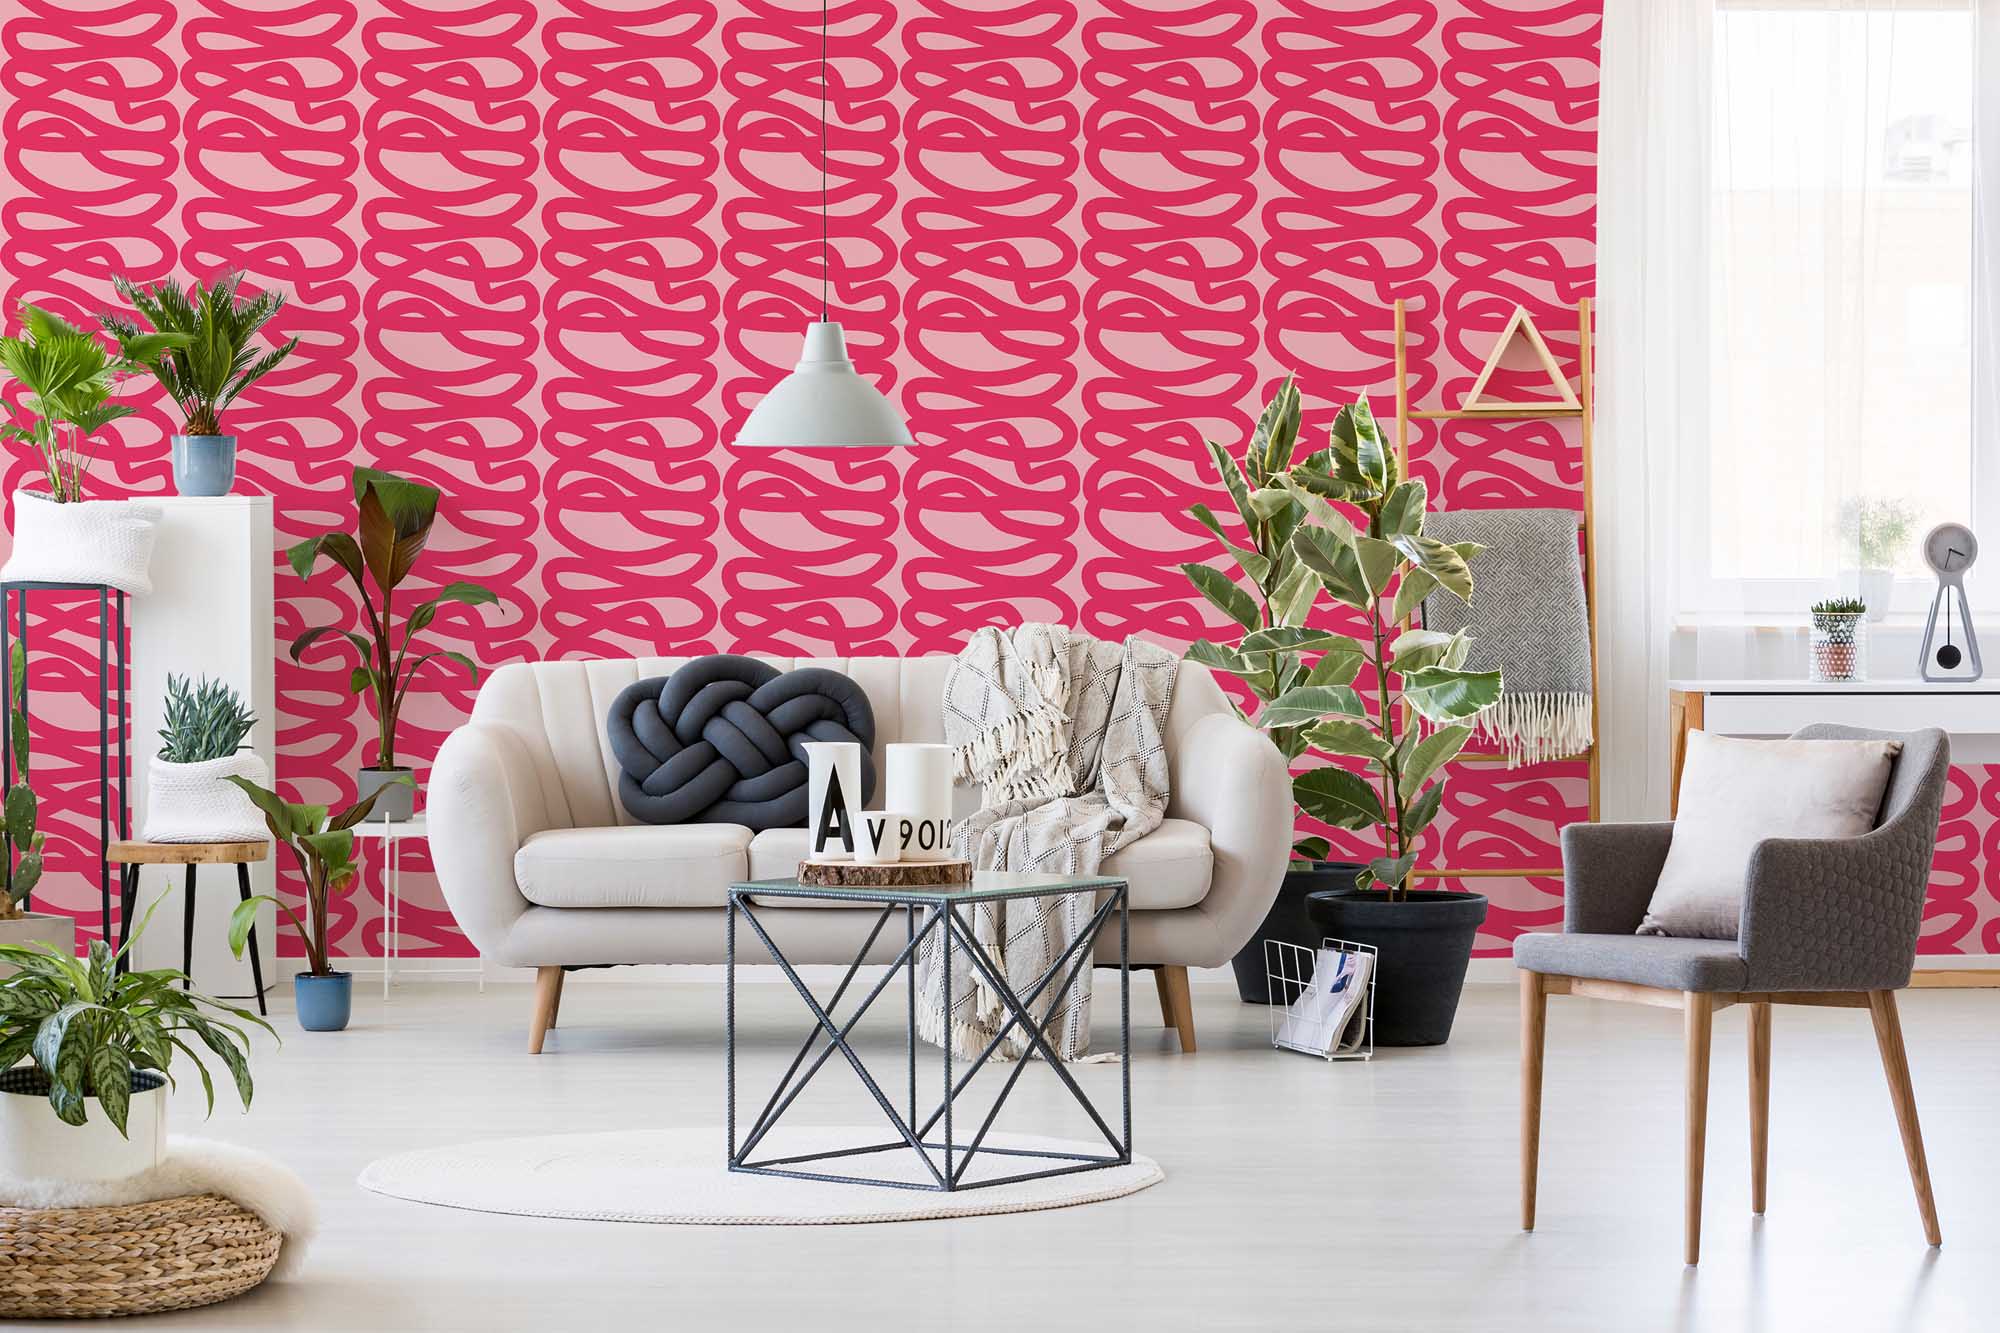 Hot pink line Wallpaper  Peel and Stick or NonPasted  Save 25